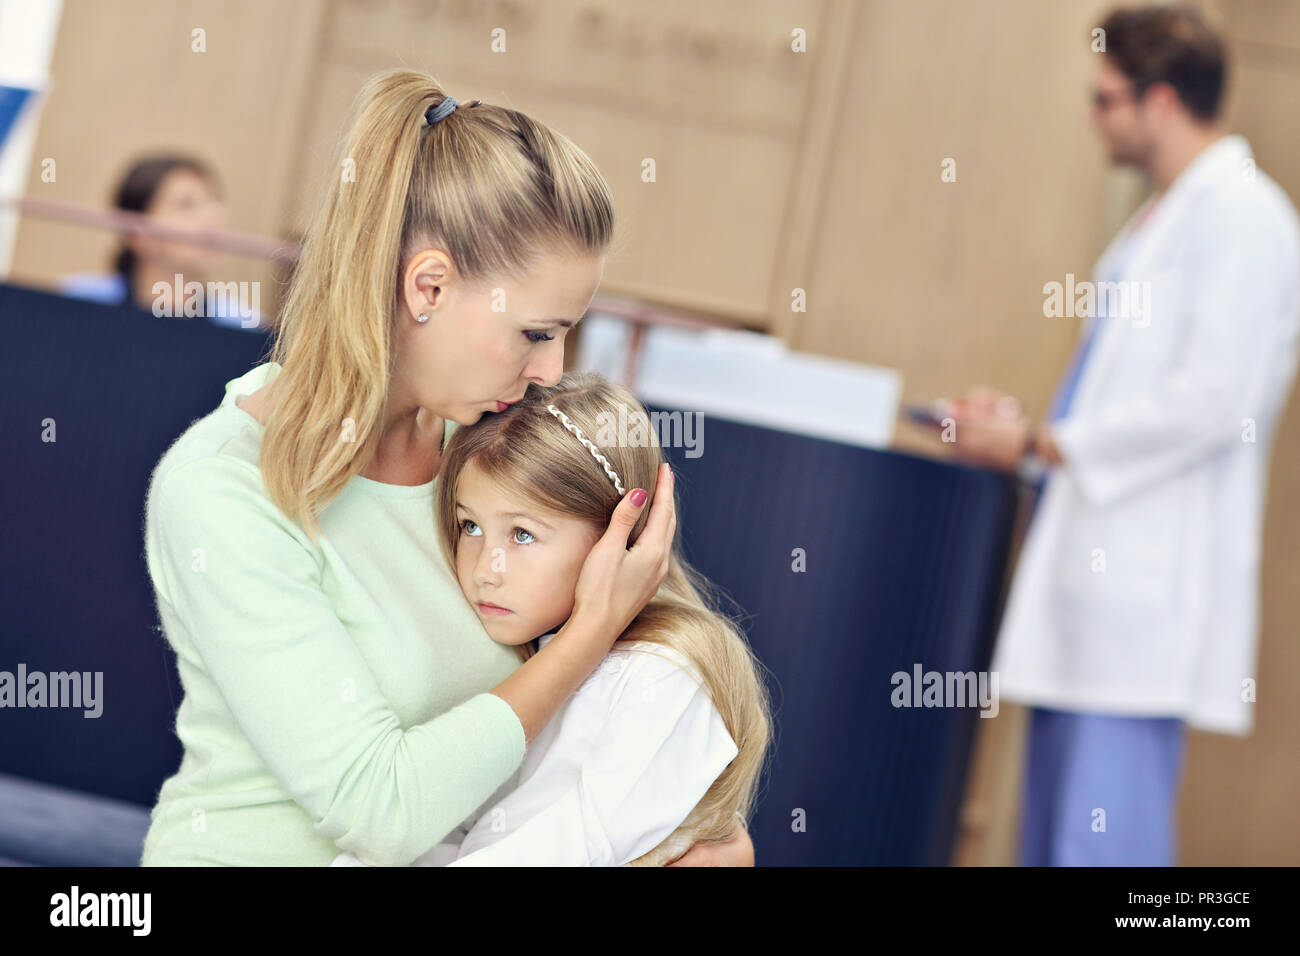 Little girl is crying while with her mother at a doctor on consultation Stock Photo